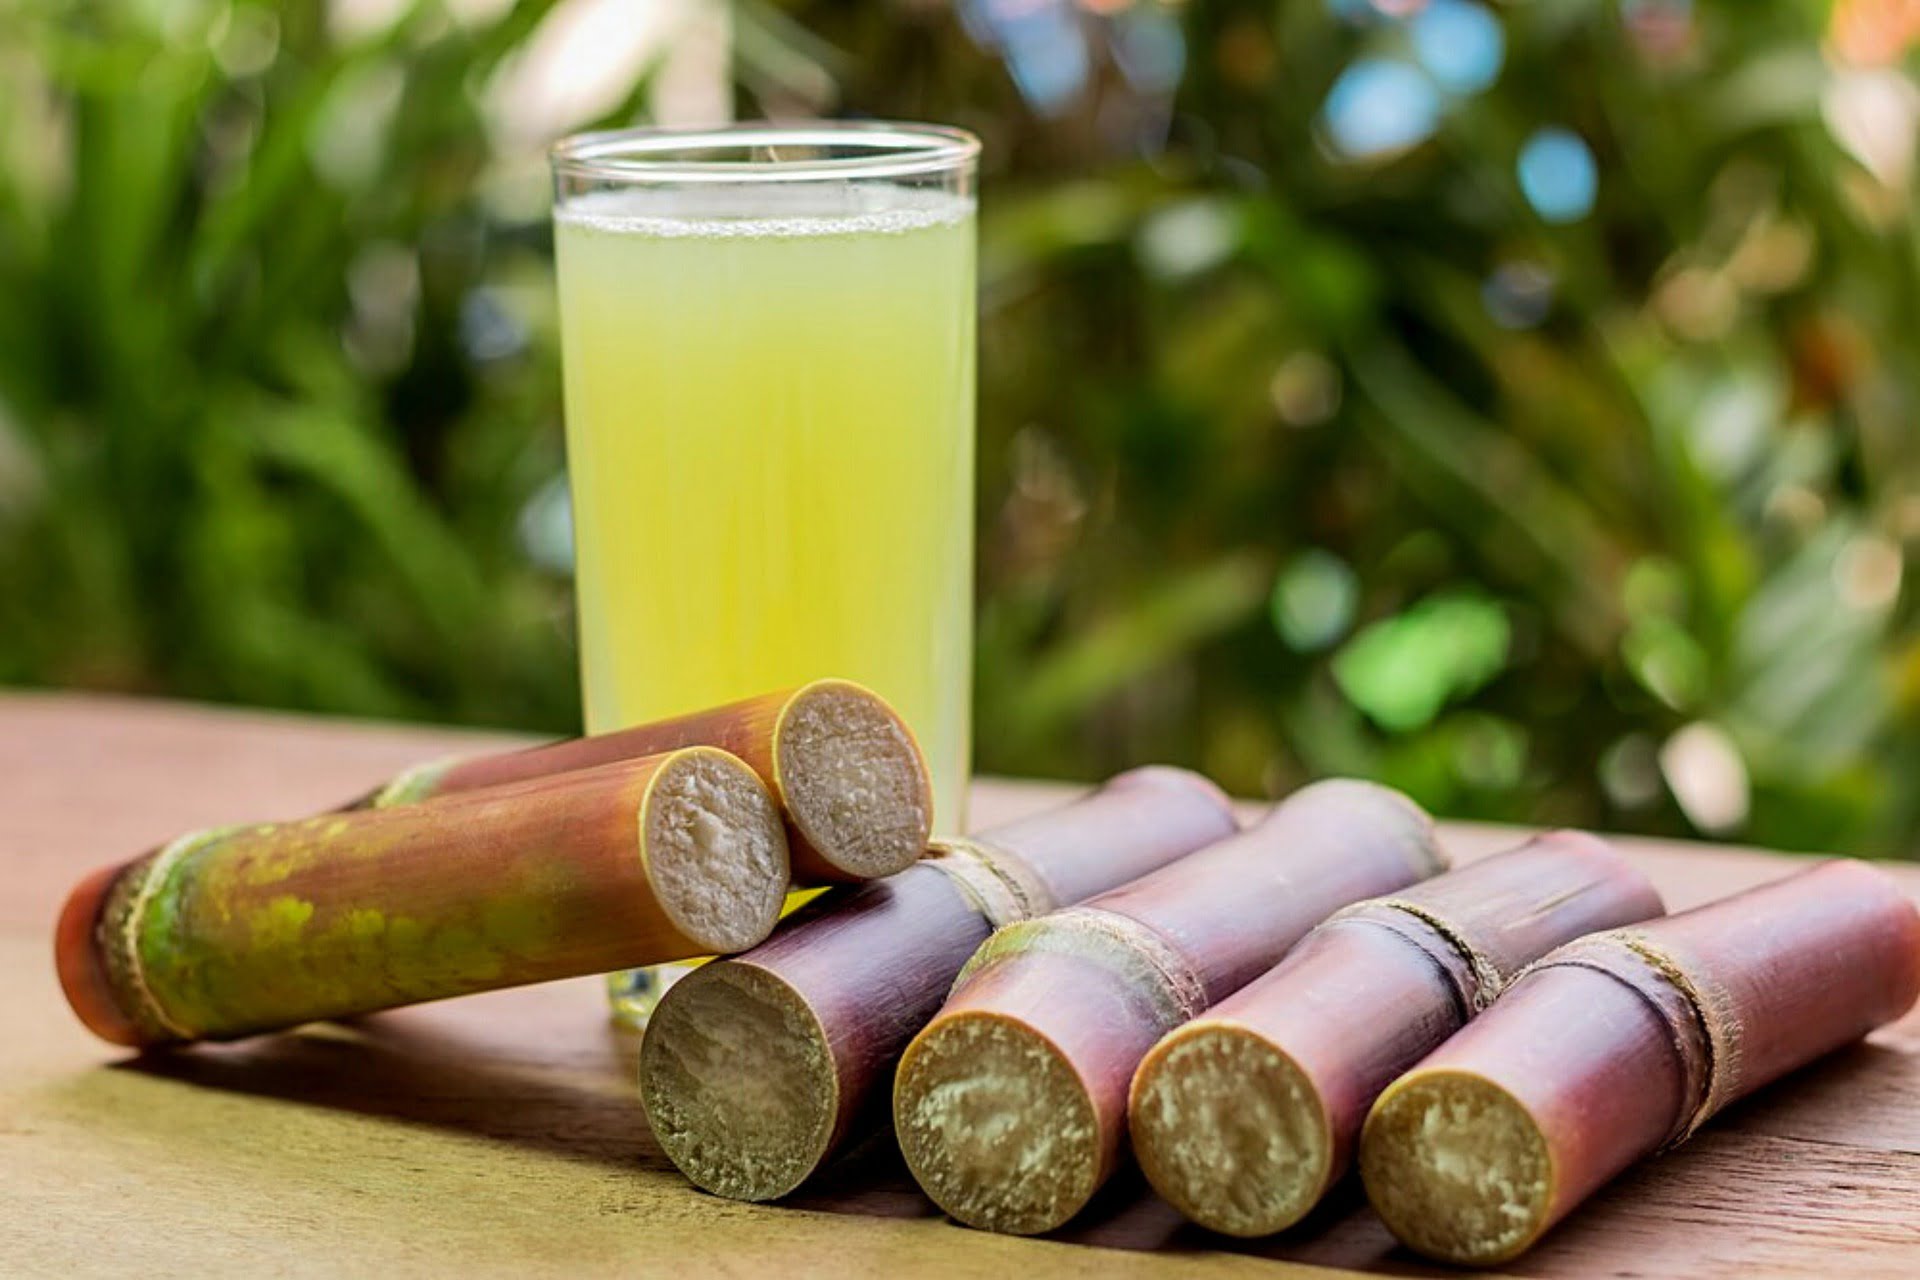 sugarcane gcb8eada03 1920 Here’s How a Sugar Tax Tackles Health and Carbon Emissions in Single Blow